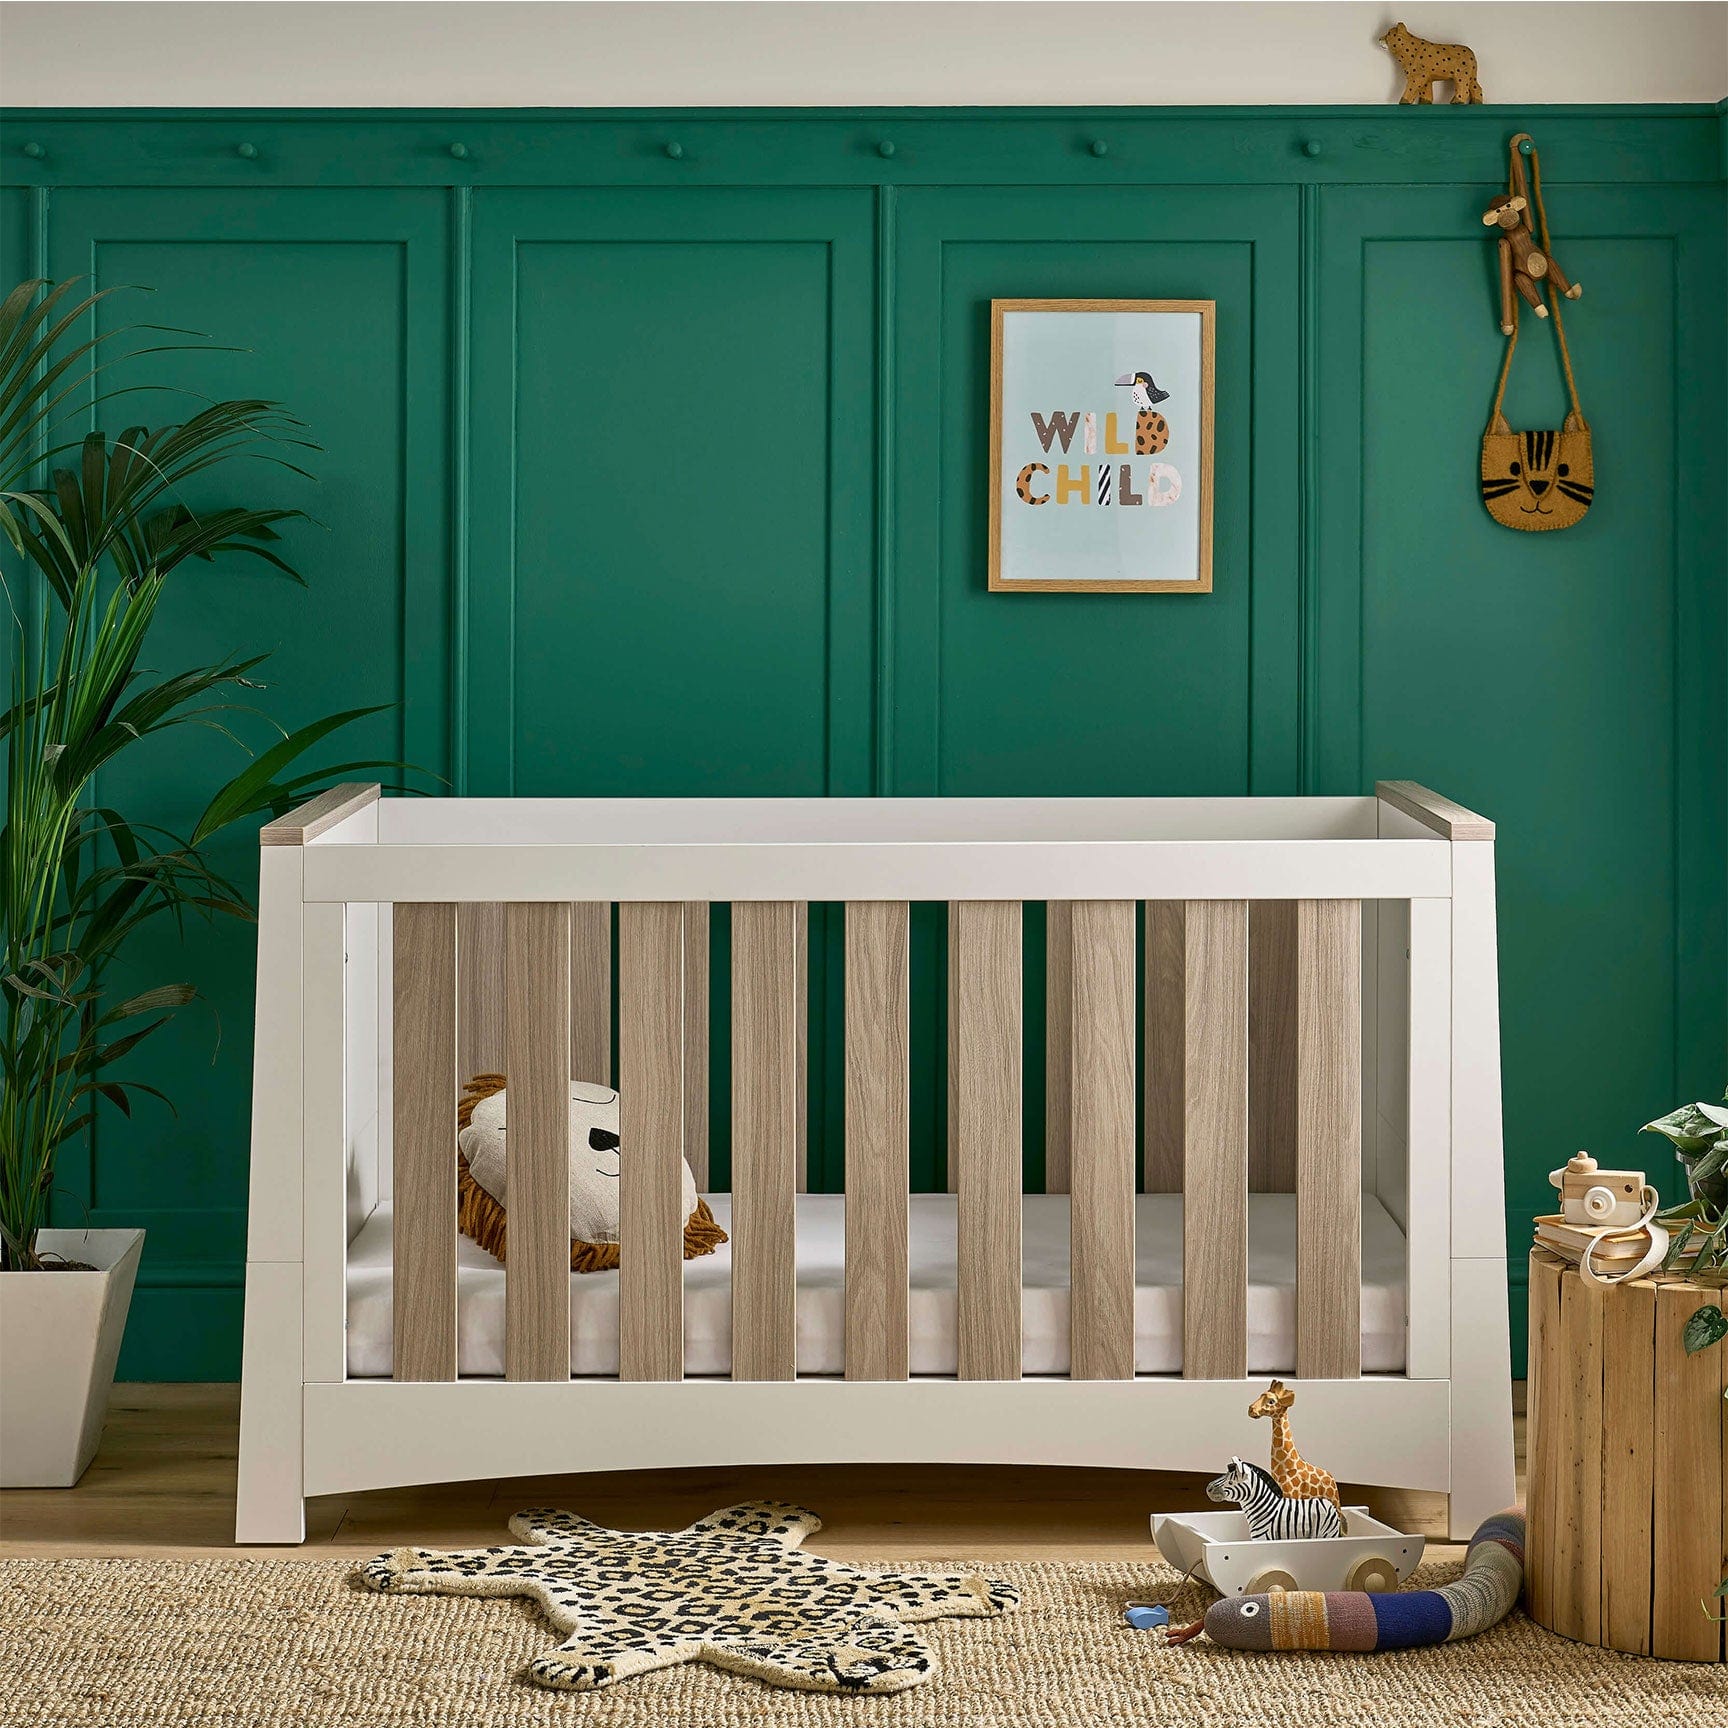 CuddleCo Cot Beds CuddleCo Ada Cotbed